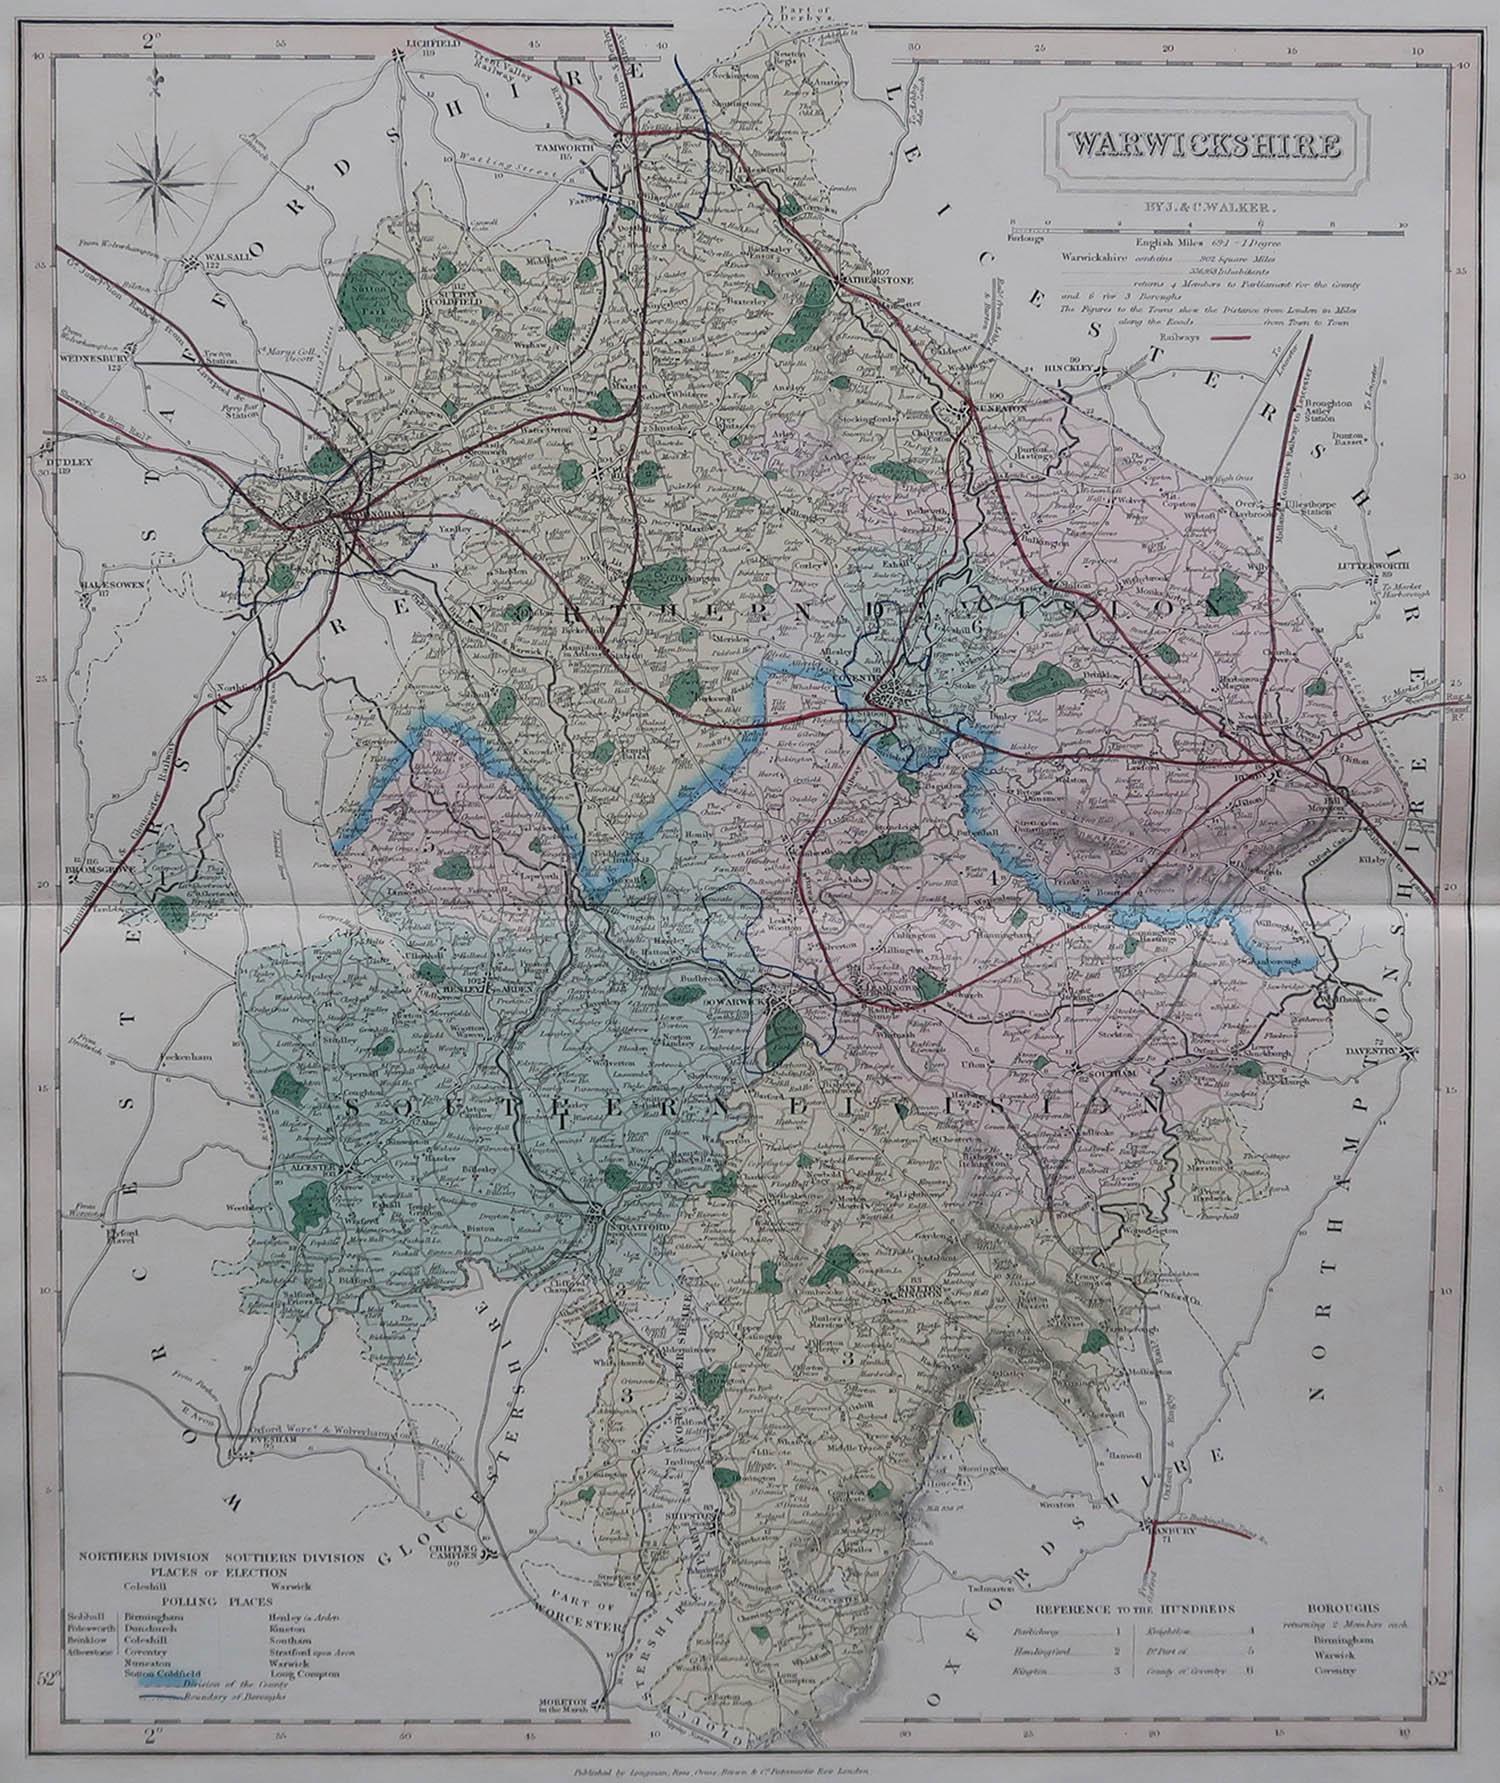 Great map of Warwickshire

Original colour

By J & C Walker

Published by Longman, Rees, Orme, Brown & Co. 1851

Unframed.




